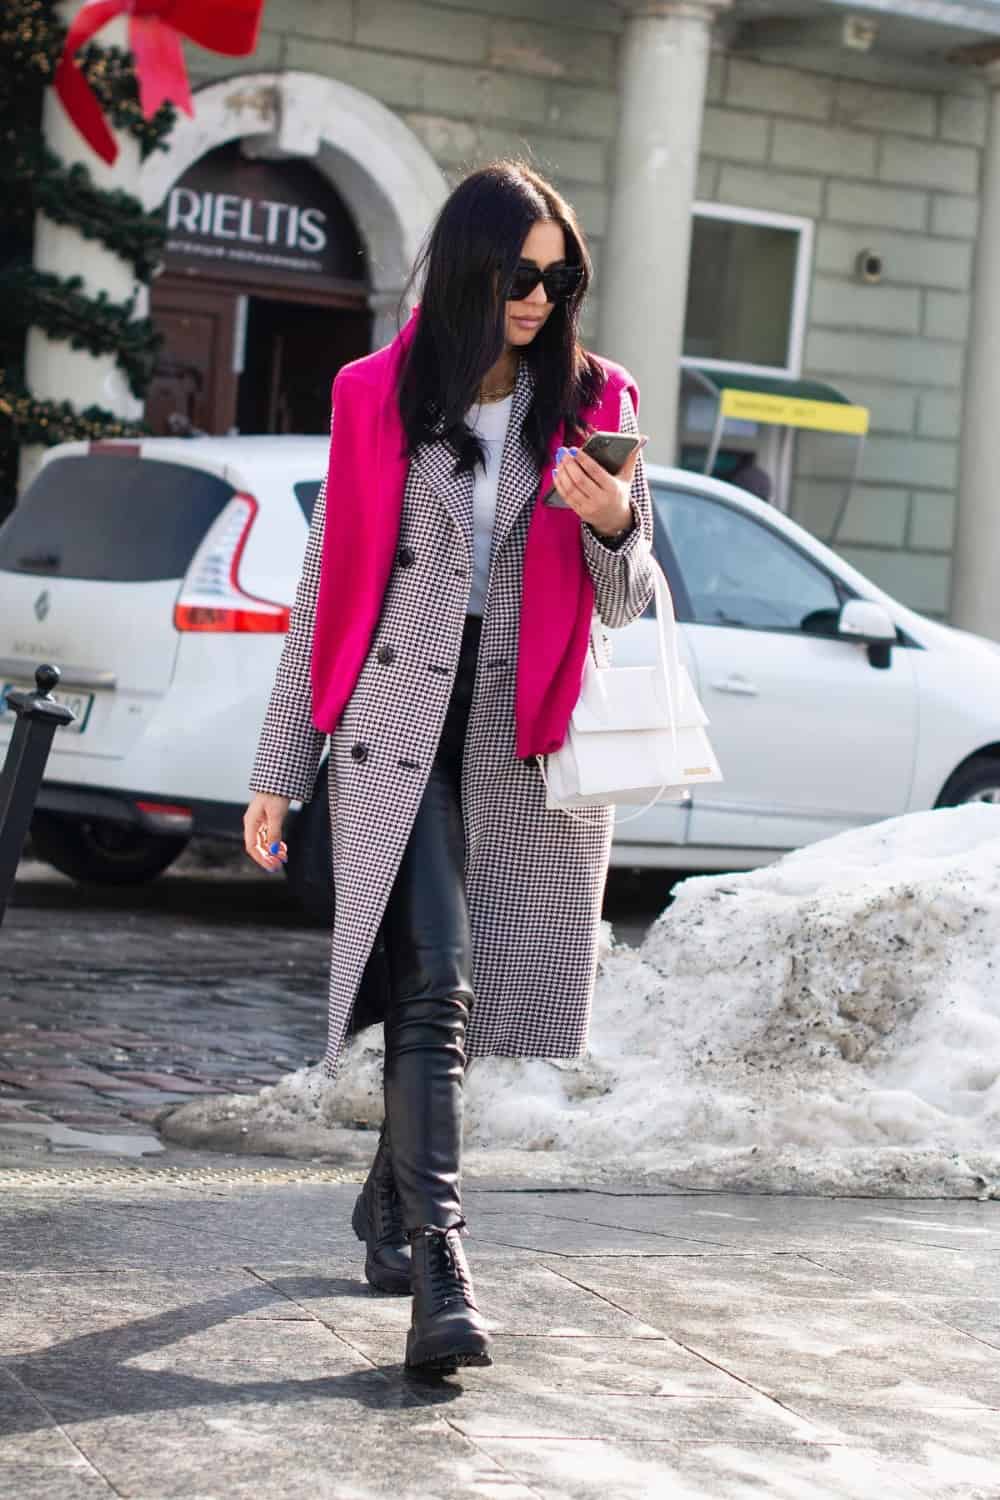 Touch of Fuchsia in the outfit